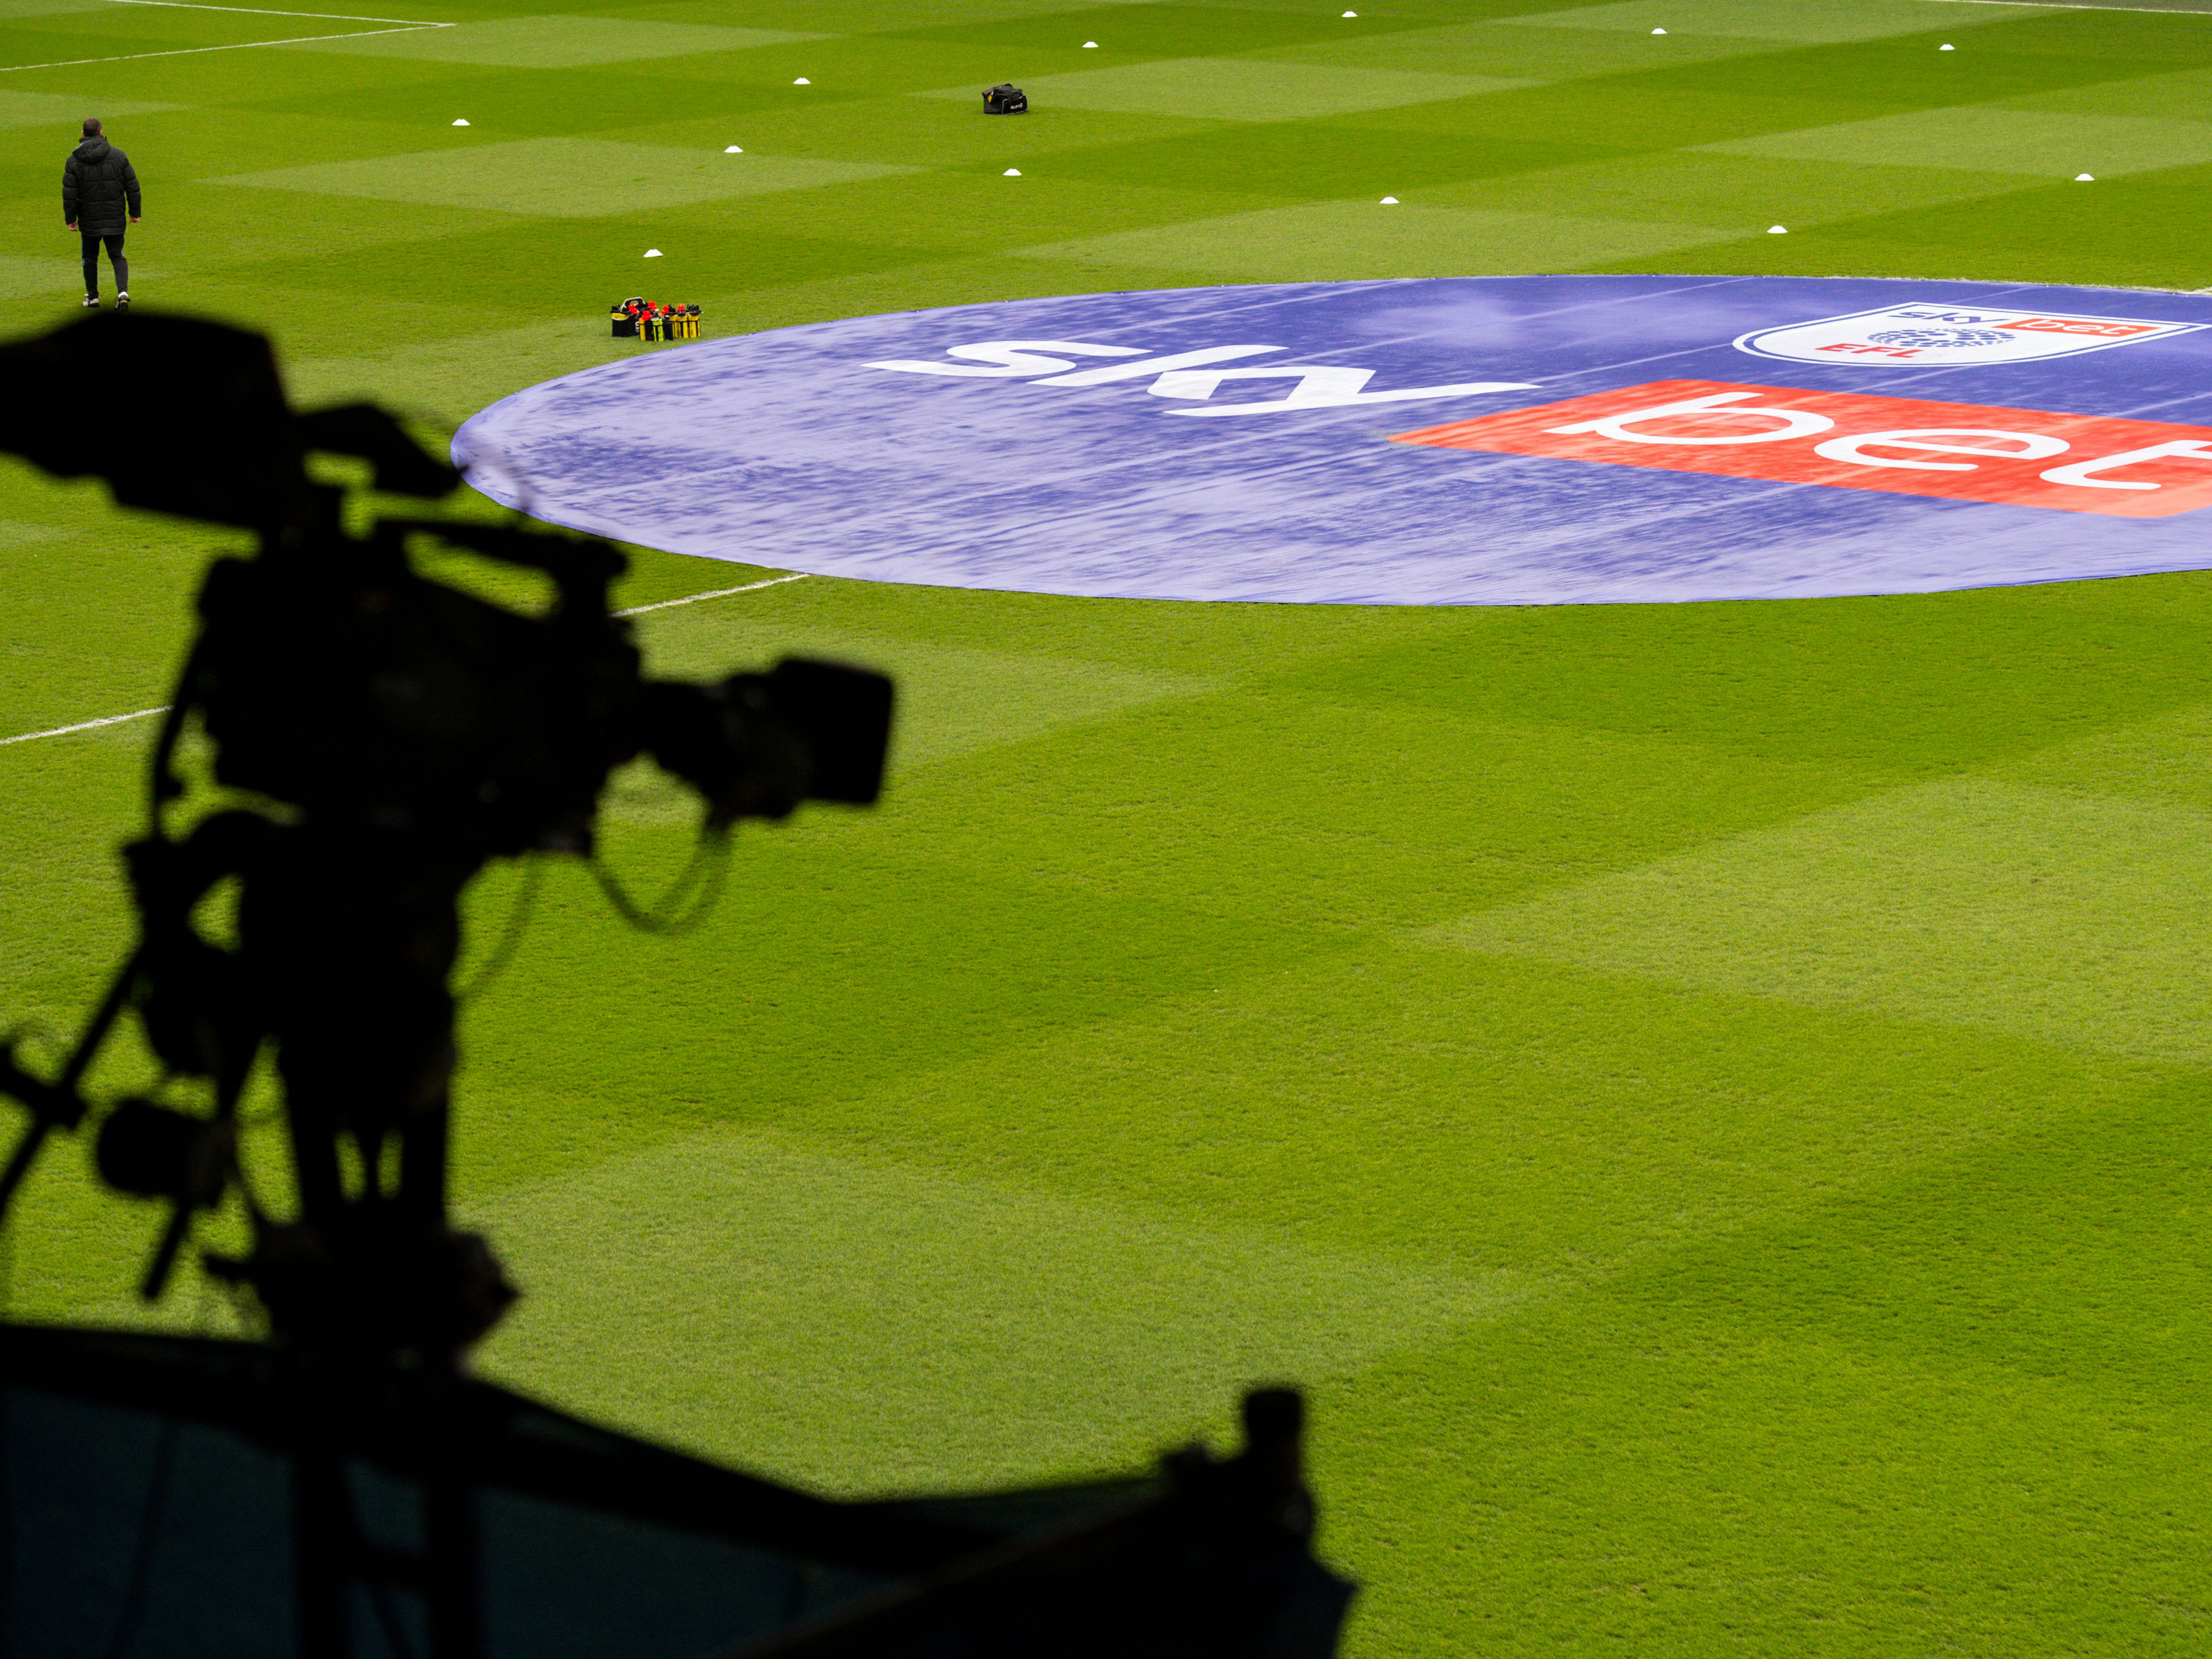 An image of a TV camera overlooking a pitch